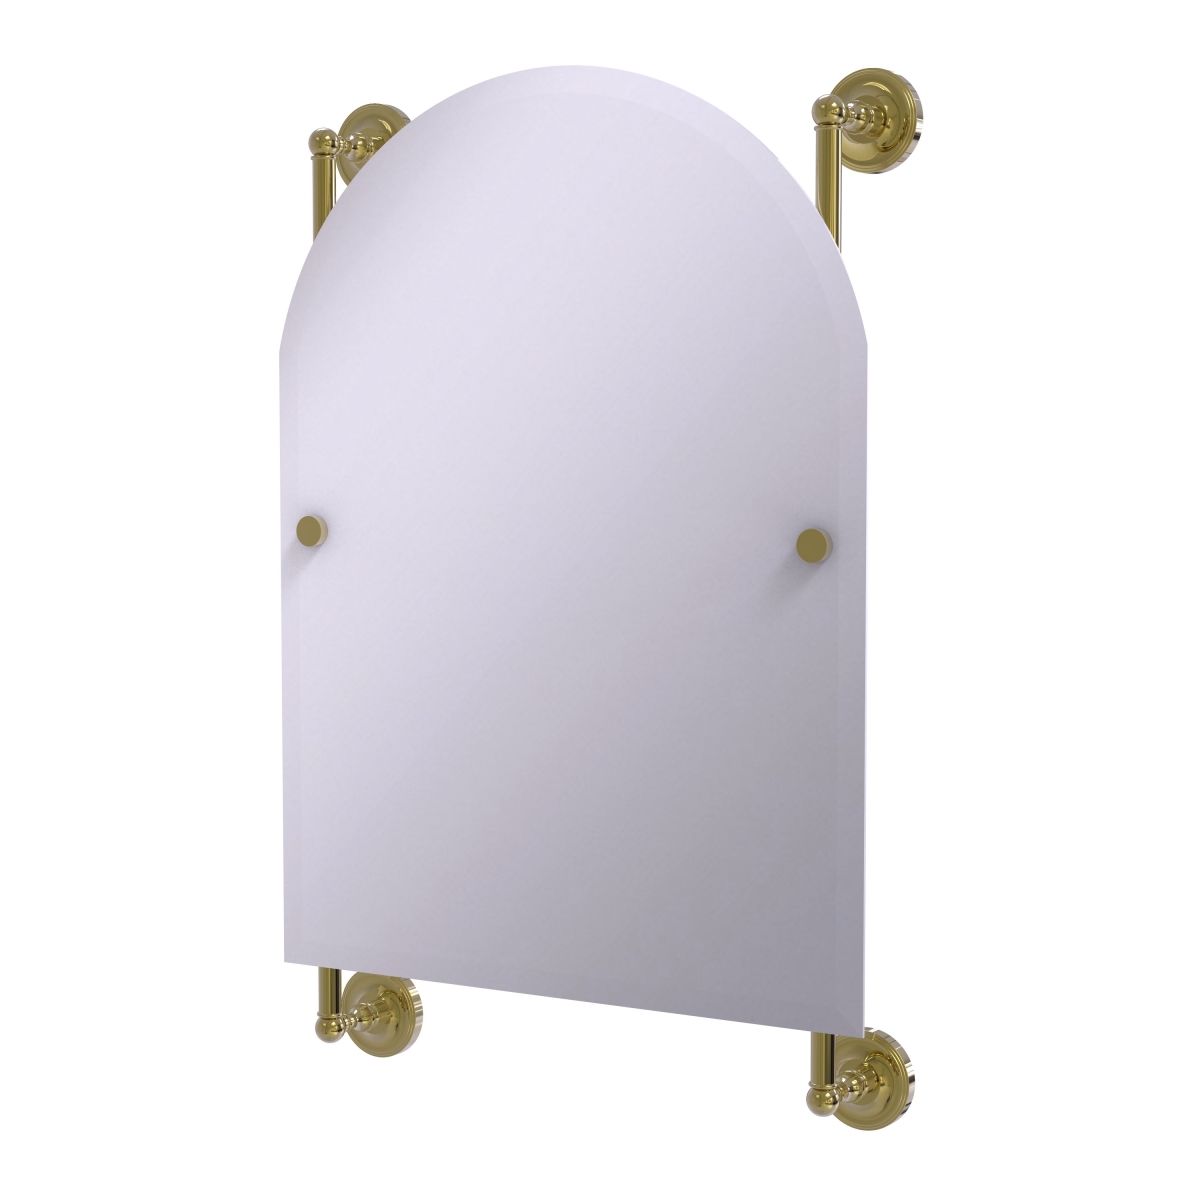 Pr-27-94-unl Prestige Regal Collection Arched Top Frameless Rail Mounted Mirror, Unlacquered Brass